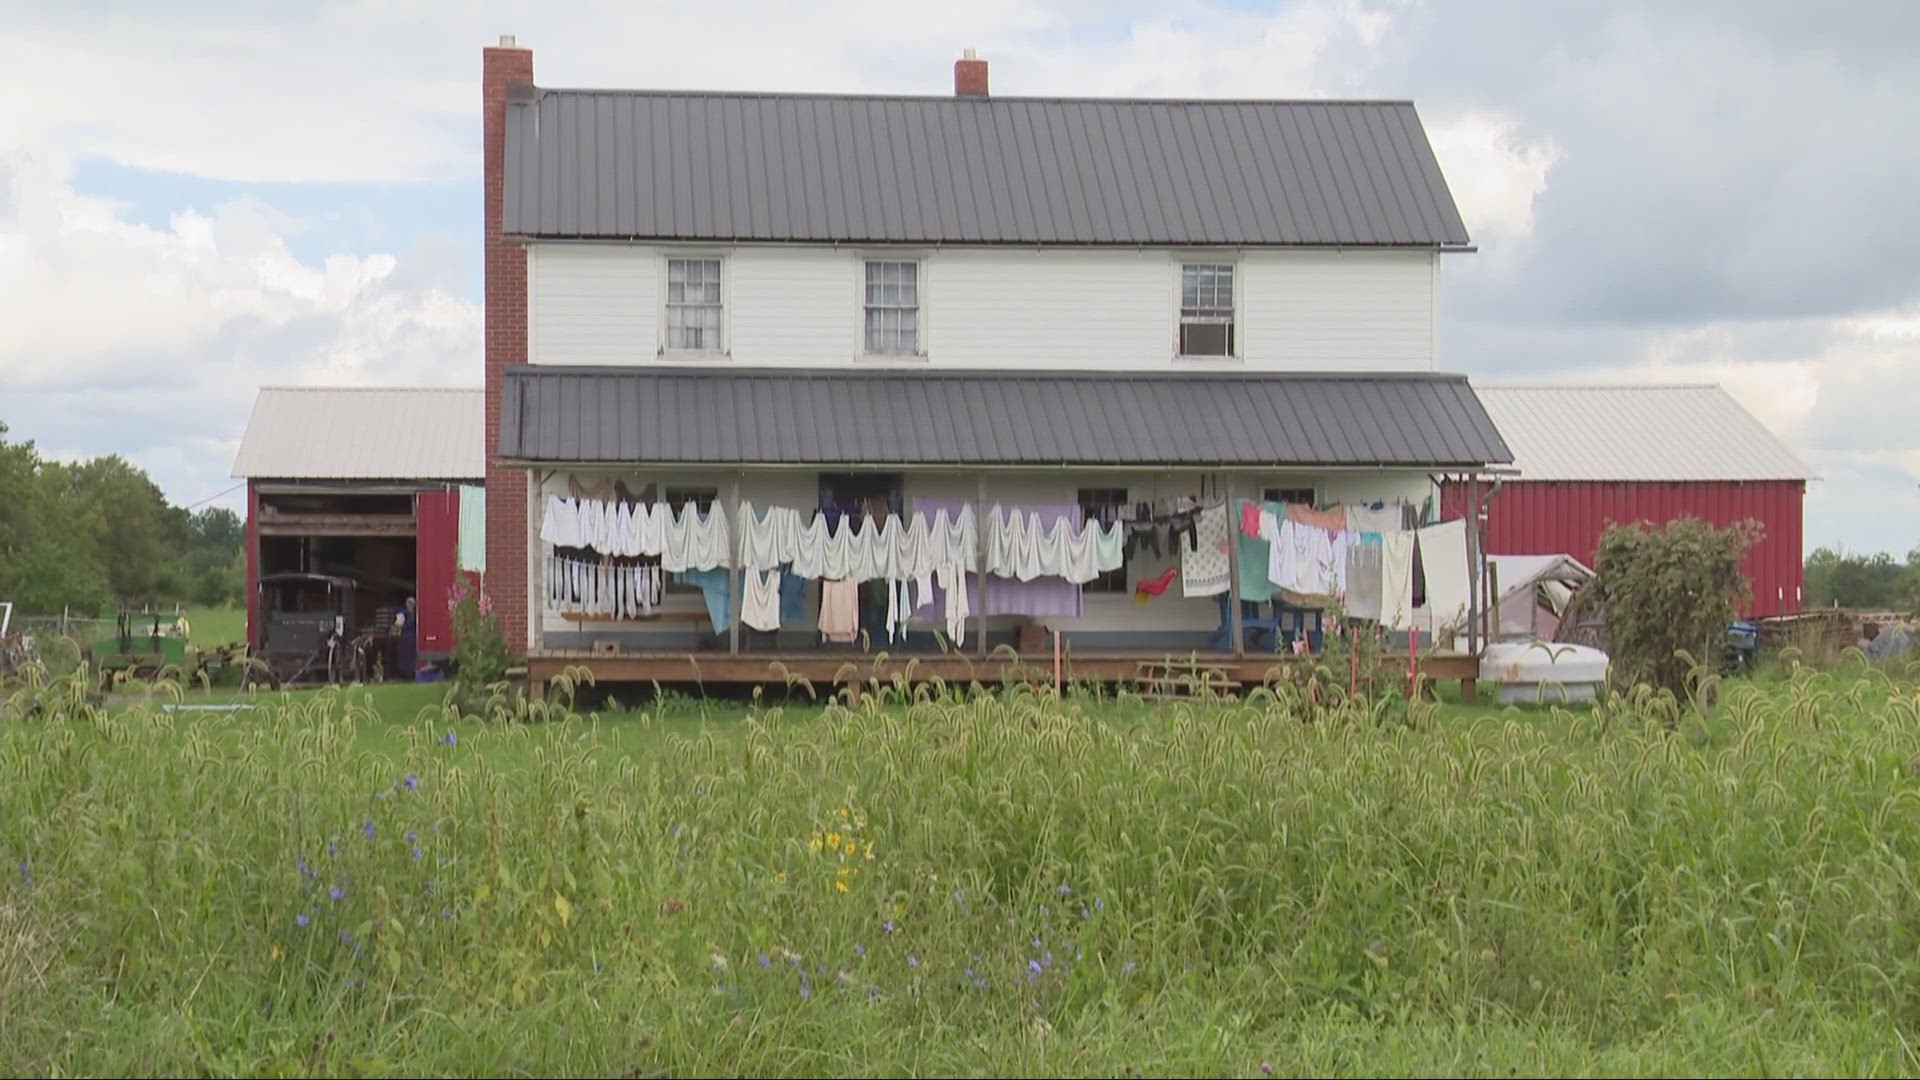 Medina County deputies are investigating alleged hate crimes against Amish communities in the area.